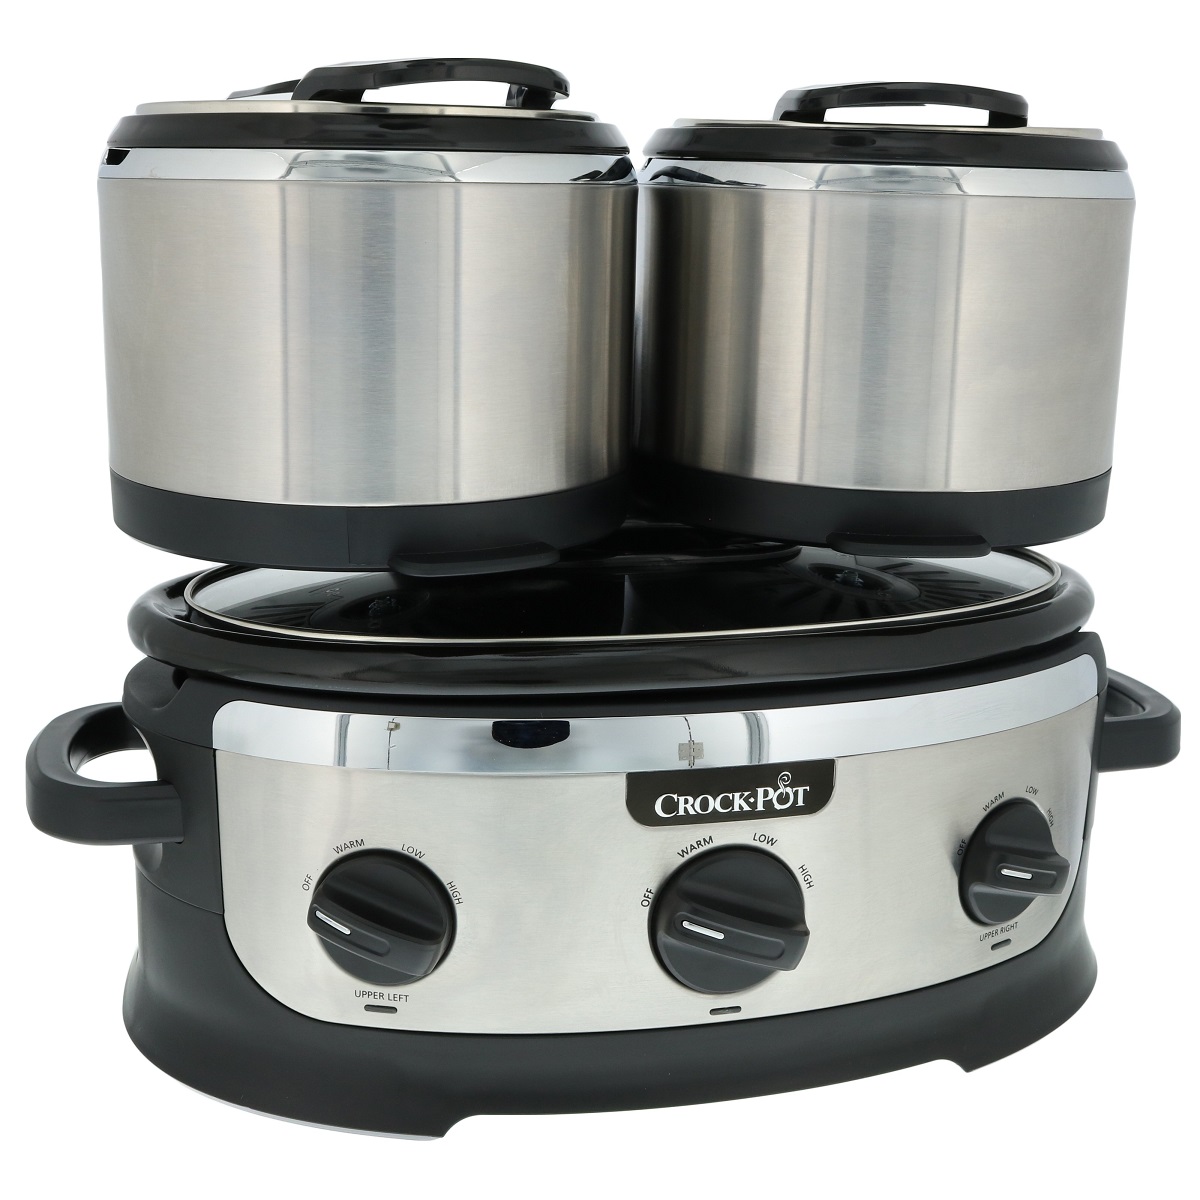 SUNVIVI Small Double Slow Cooker, 2 Pot 1.25 Quart Oval Crock Food Warmer  Buffet Server, Stainless Steel